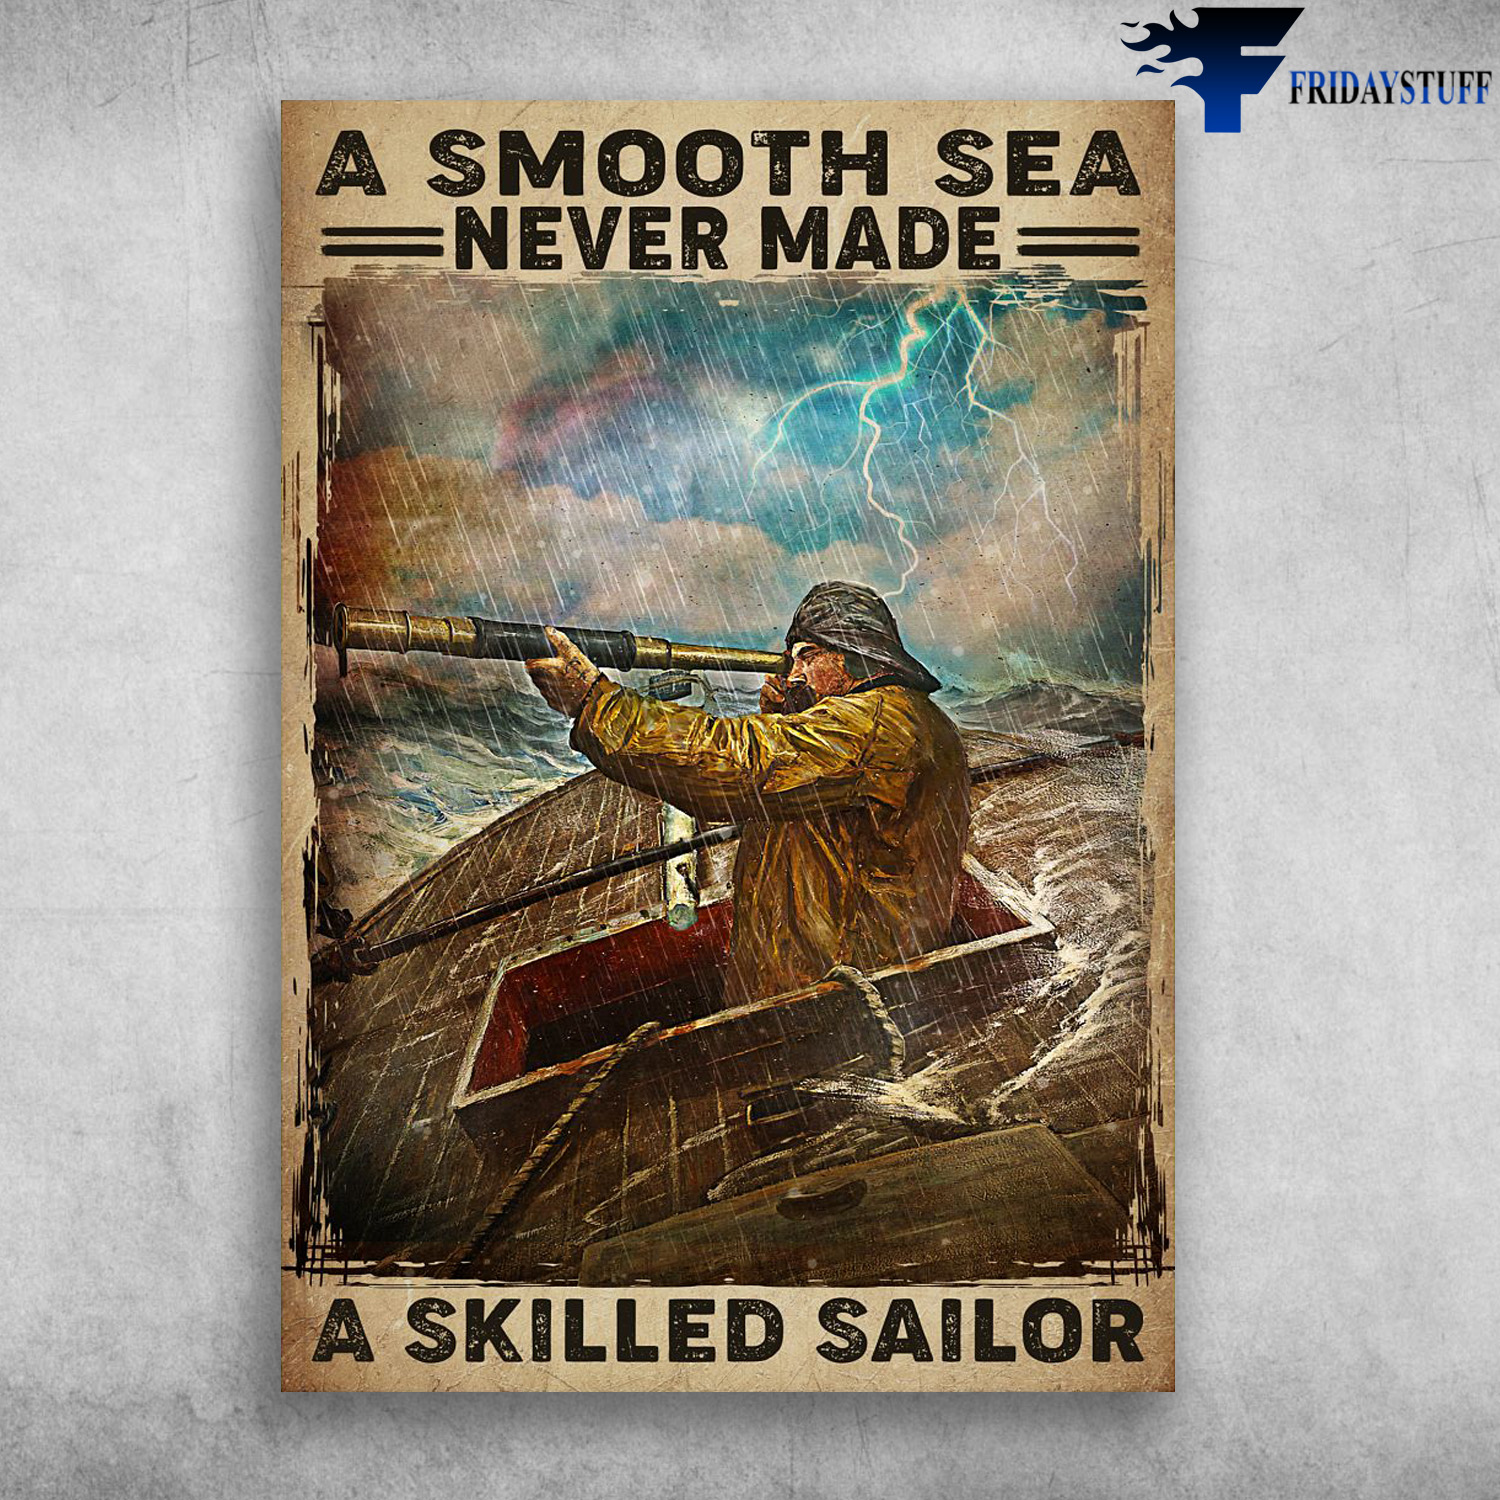 Man In The Storm, Old Sailor - A Smooth Sea, Never Made A Skilled Sailor